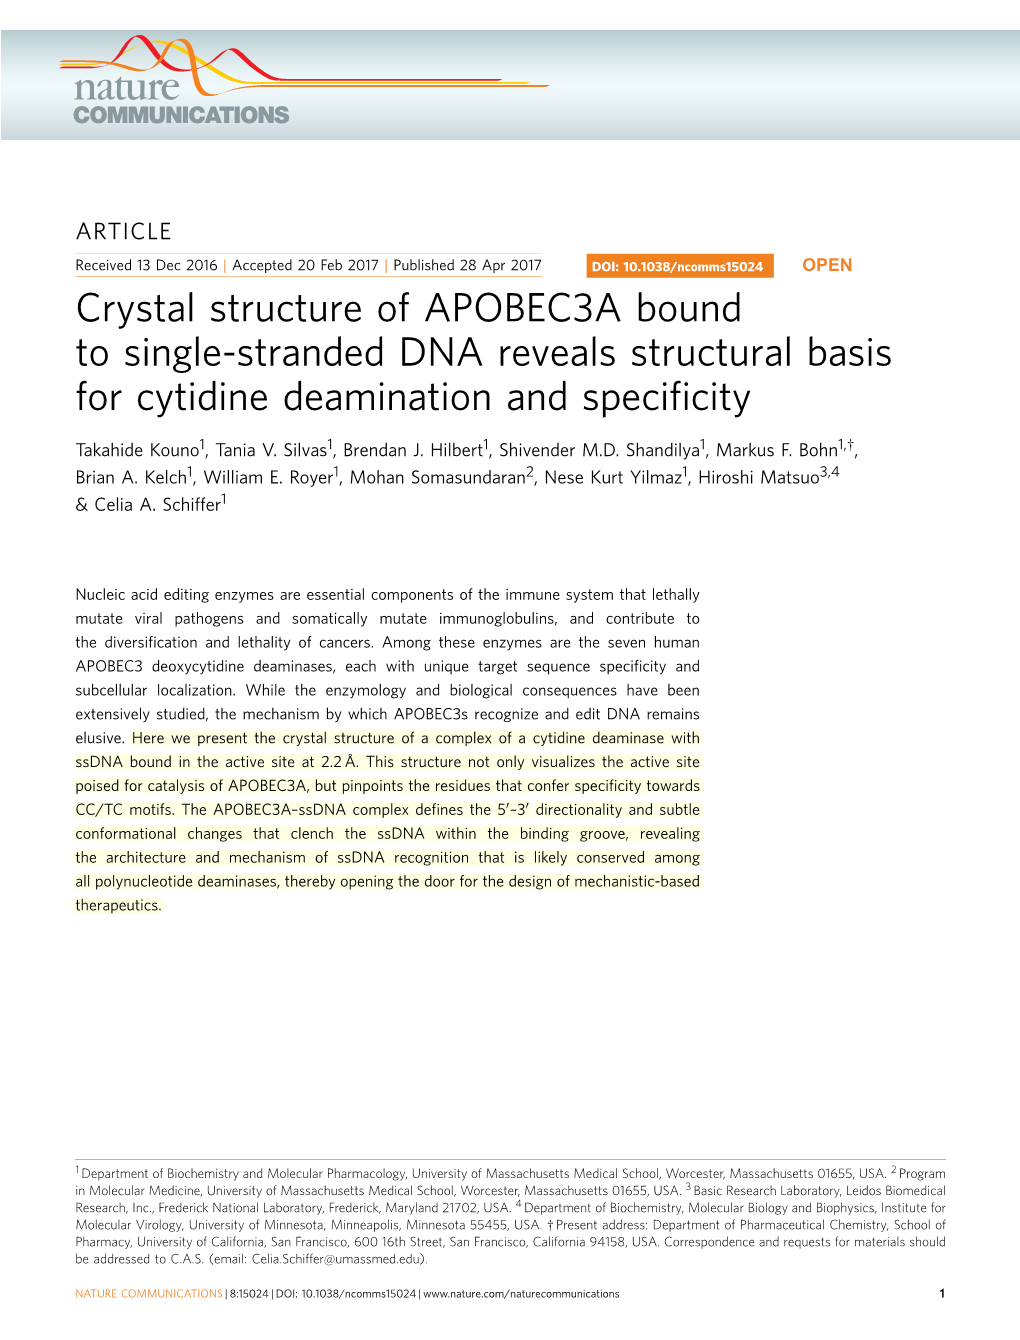 Crystal Structure of APOBEC3A Bound to Single-Stranded DNA Reveals Structural Basis for Cytidine Deamination and Speciﬁcity